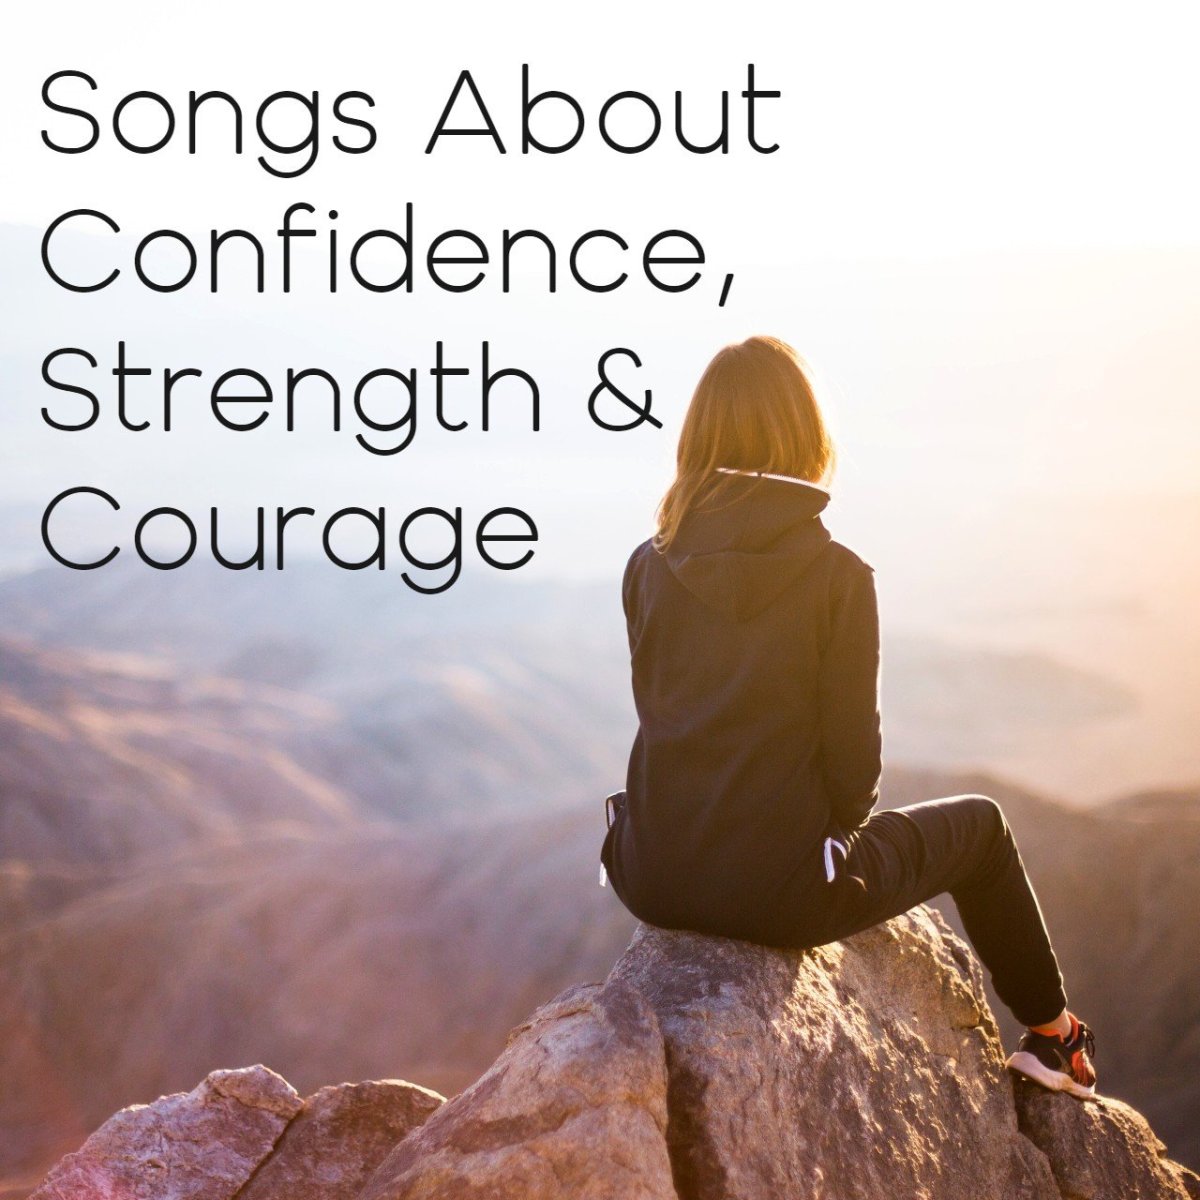 106 Songs About Confidence, Strength, and Courage